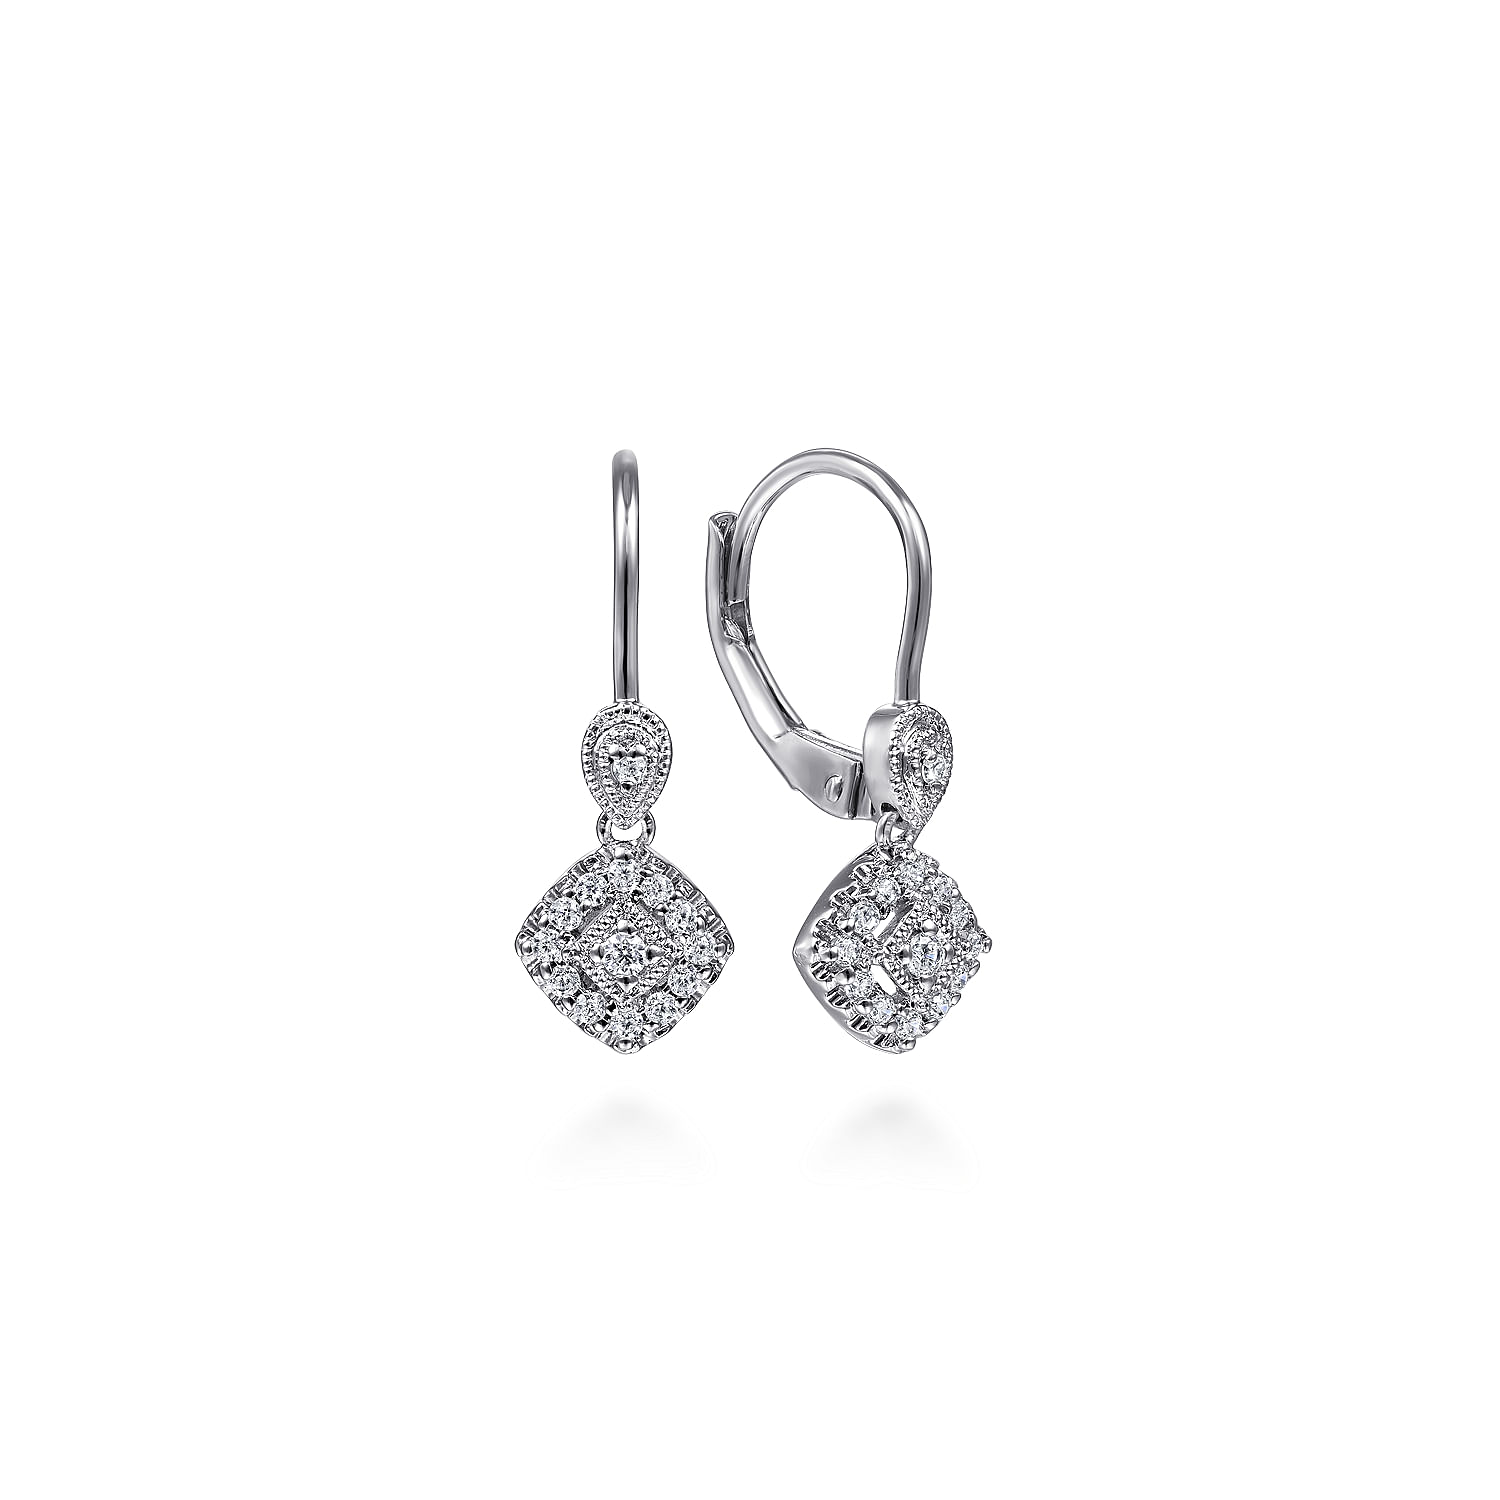 Gabriel - 14K White Gold Vintage Inspired Style Square Diamond Drop Earrings